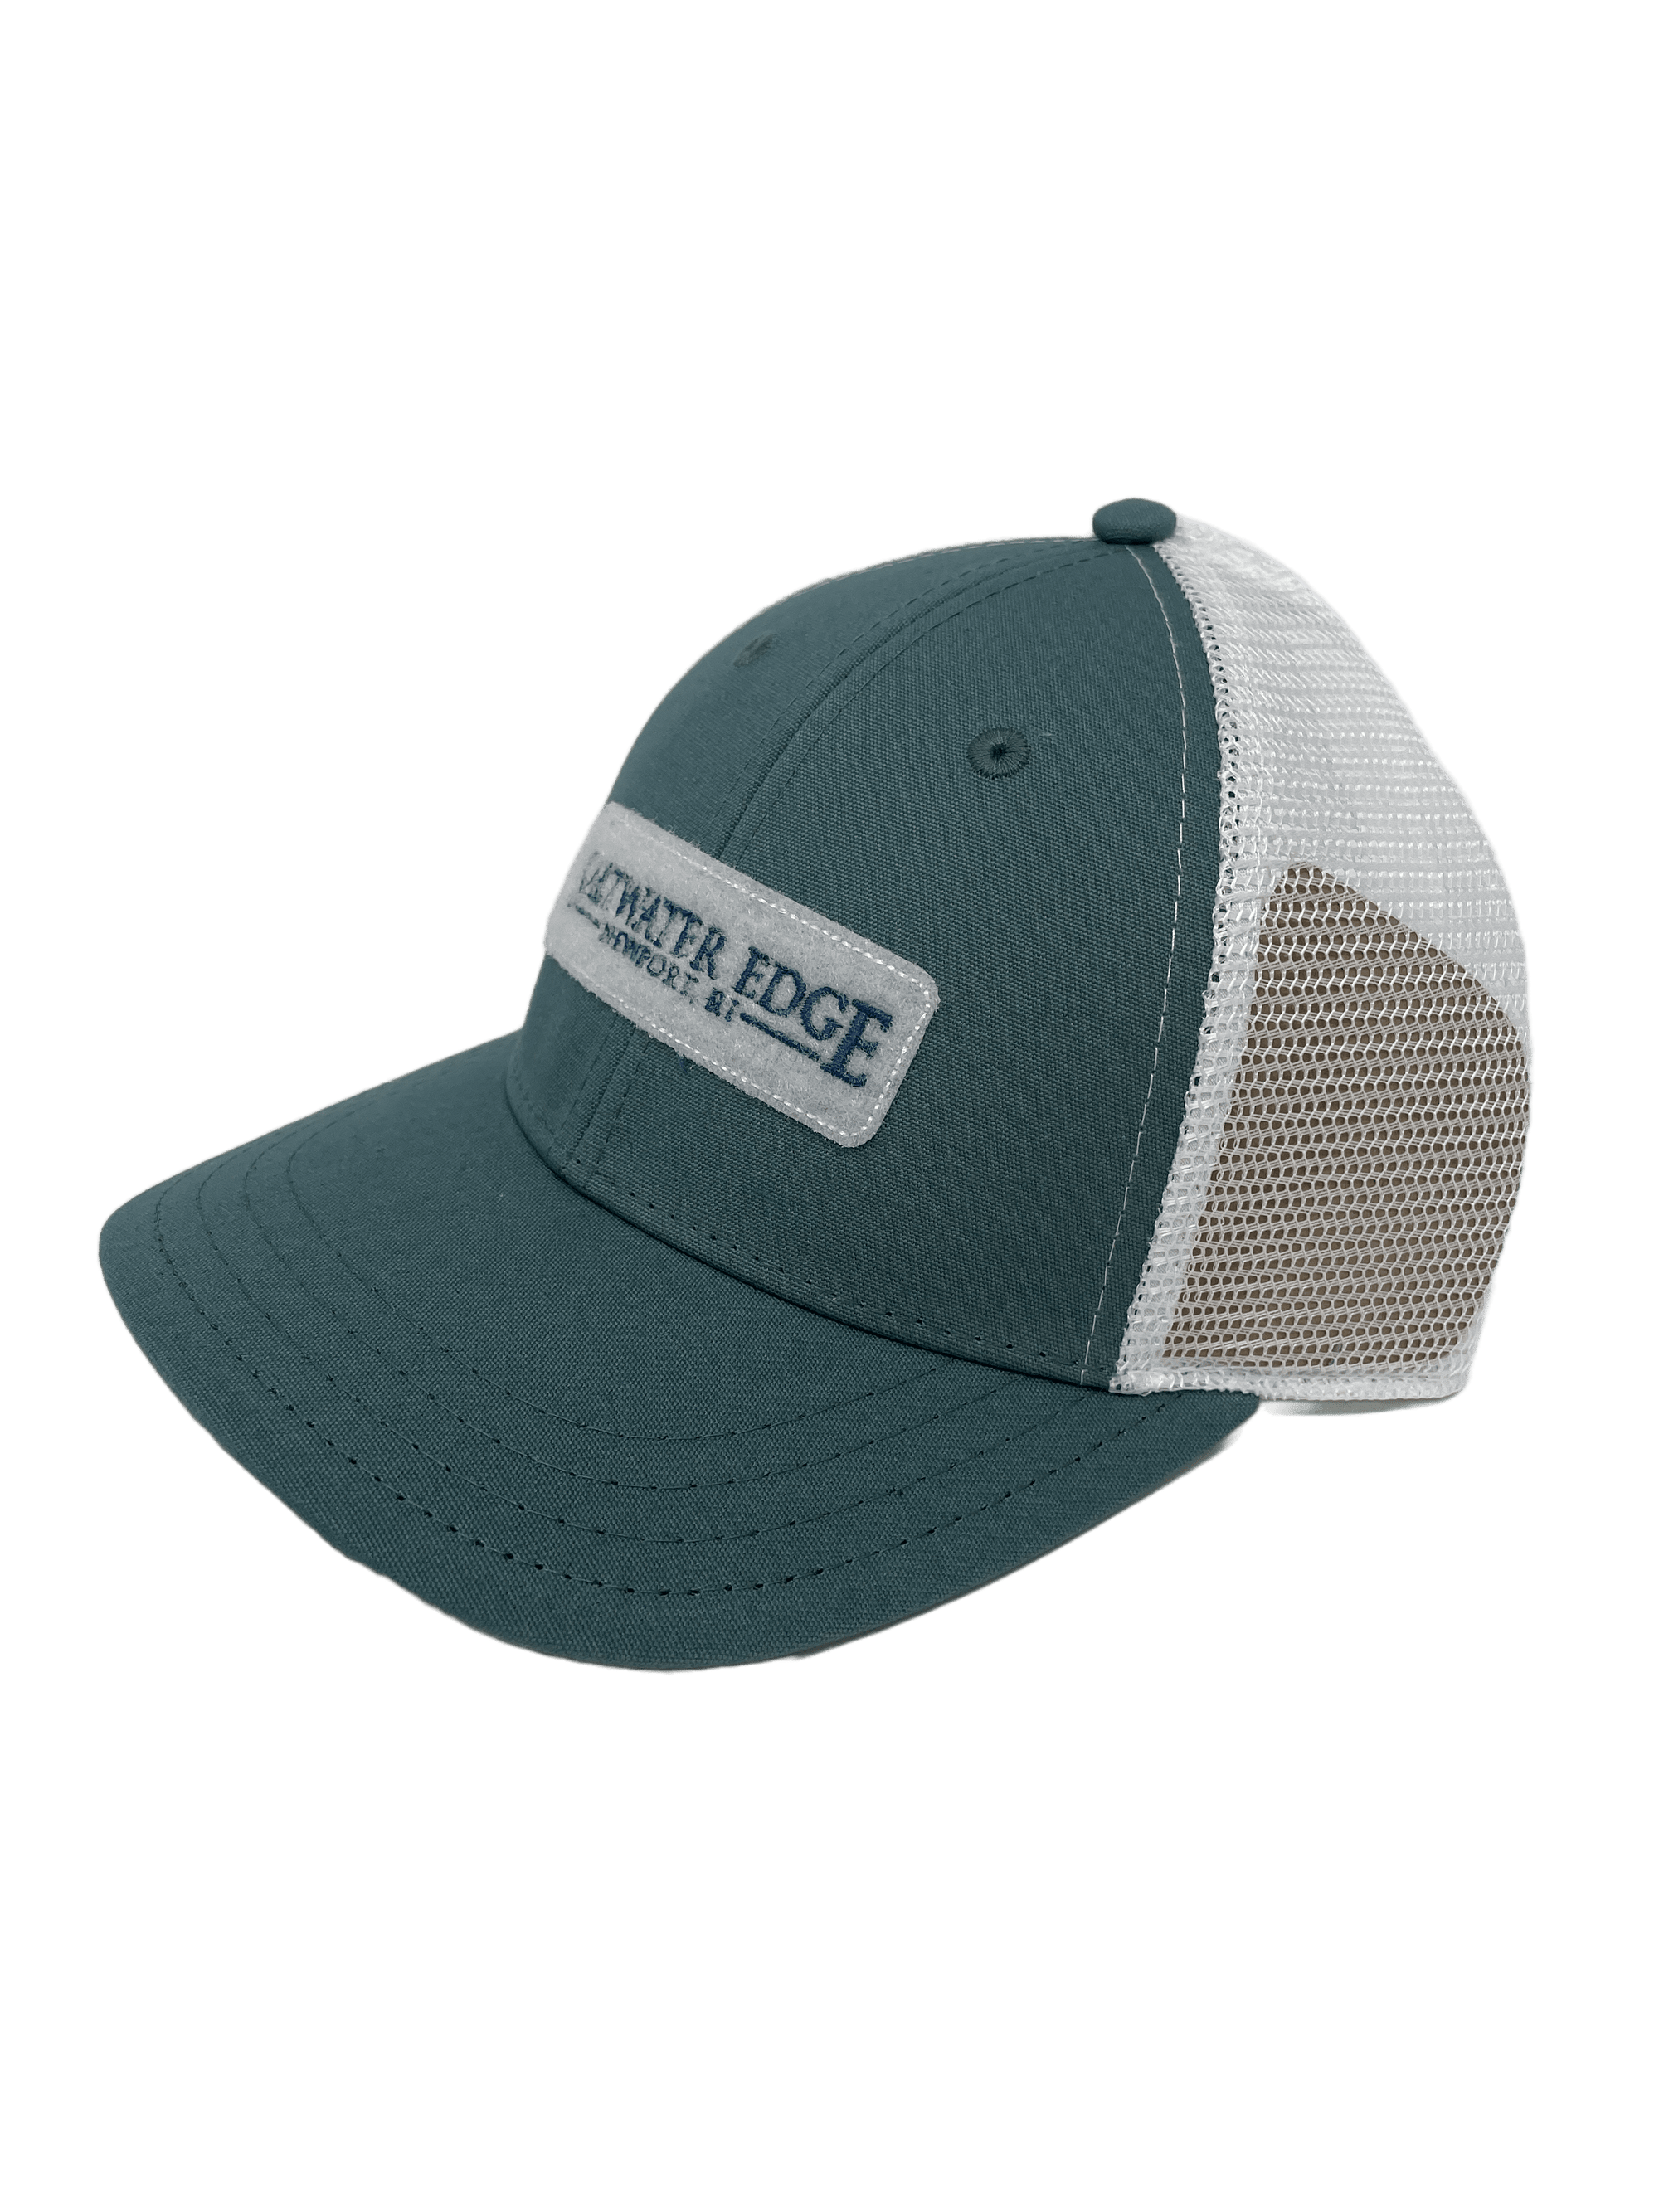 The Saltwater Edge Thames Street Patch Hat Sea Green